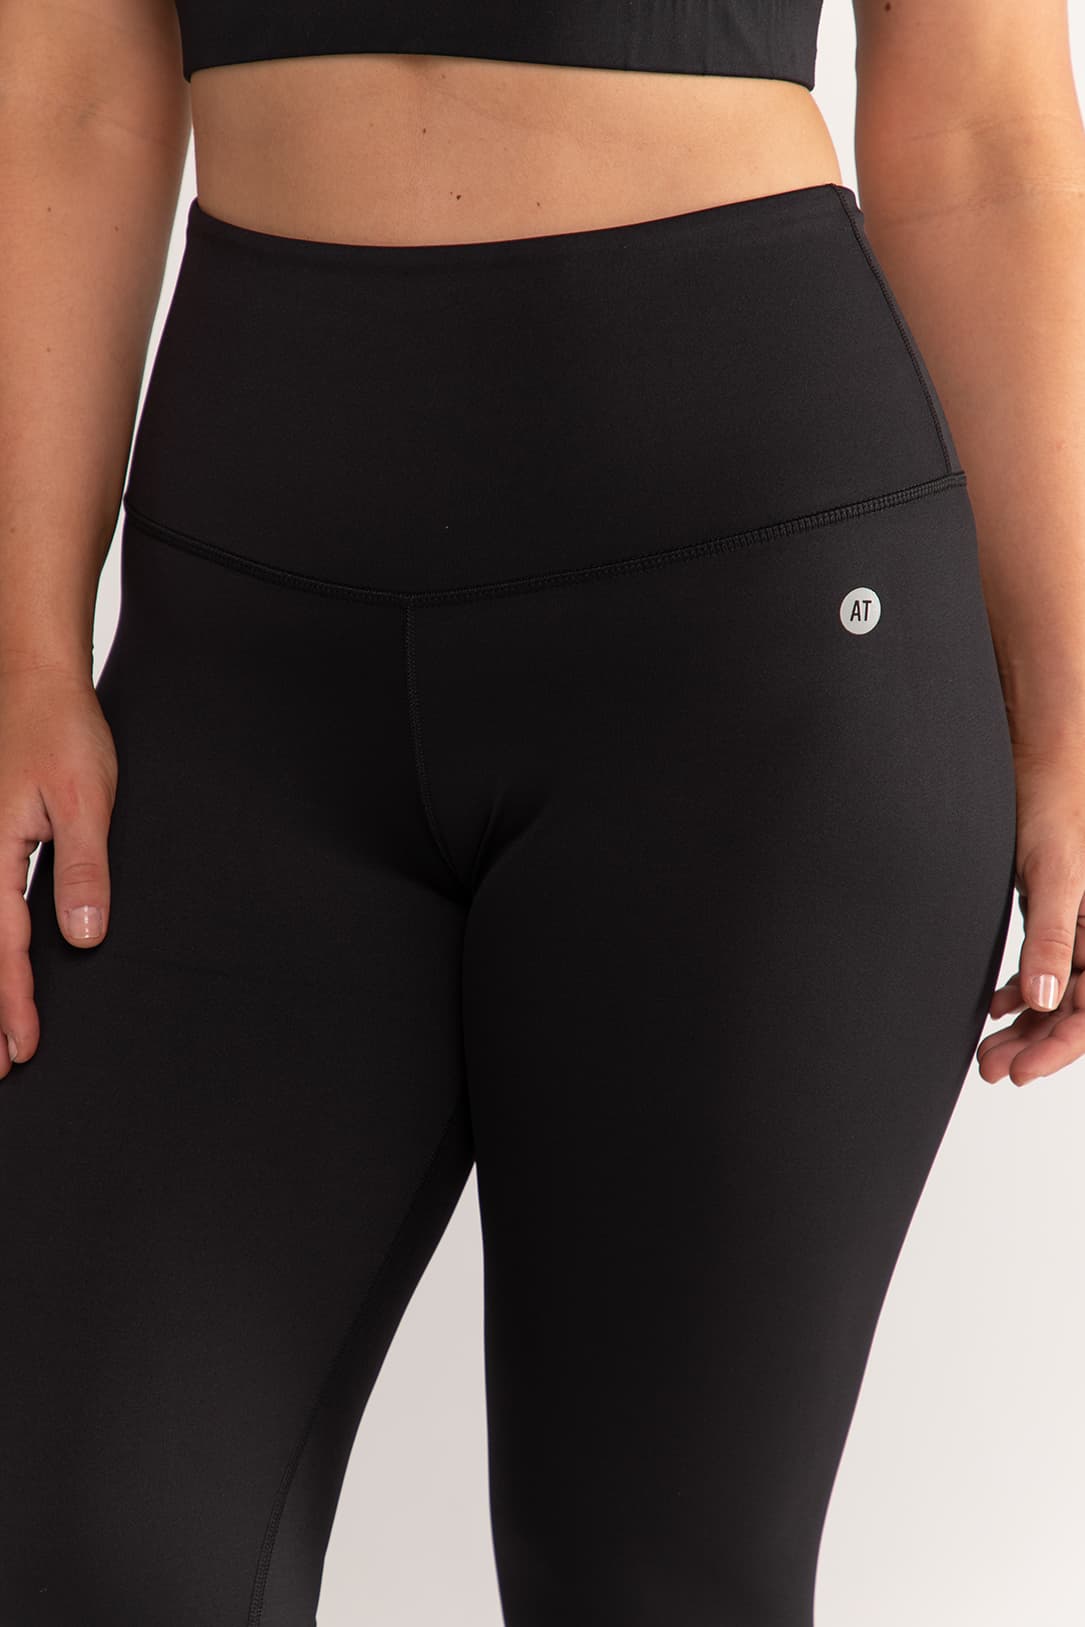 Buy SUUKSESS Women Crossover Seamless Leggings Butt Lifting High Waisted  Workout Yoga Pants, #1 Black, Small at Amazon.in